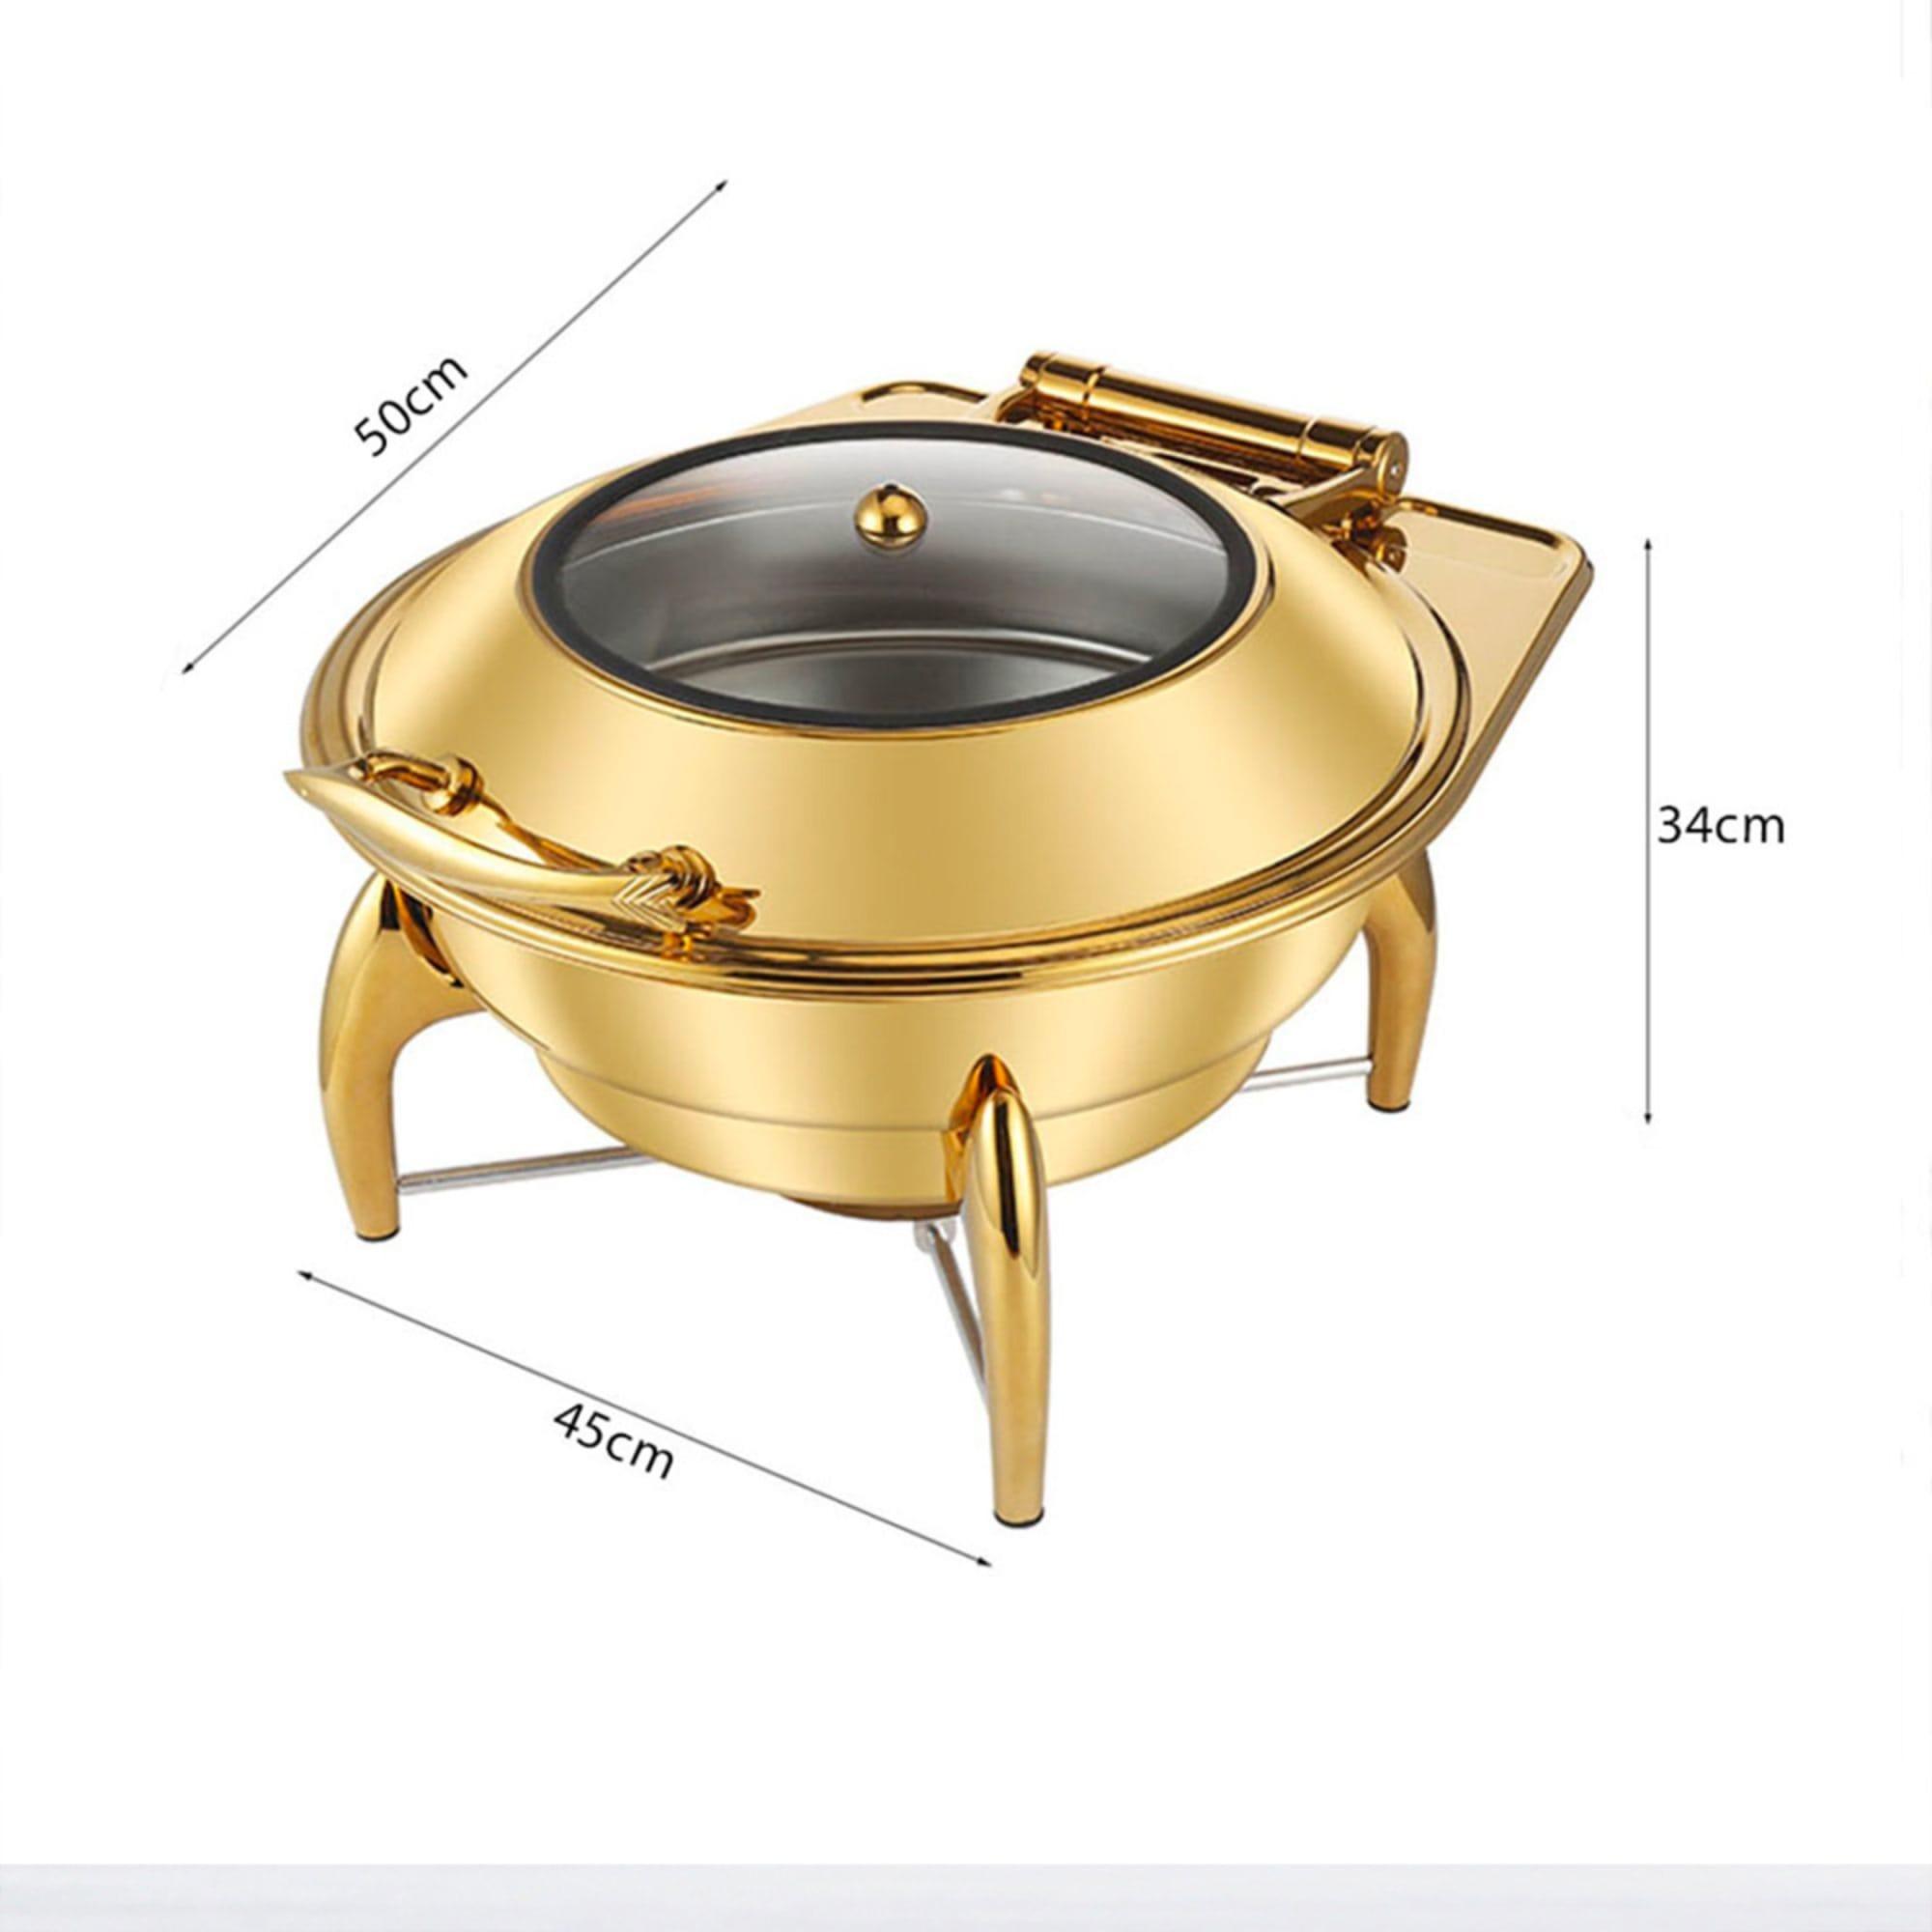 Soga Round Stainless Steel Chafing Dish with Top Lid Set of 2 Gold Image 5